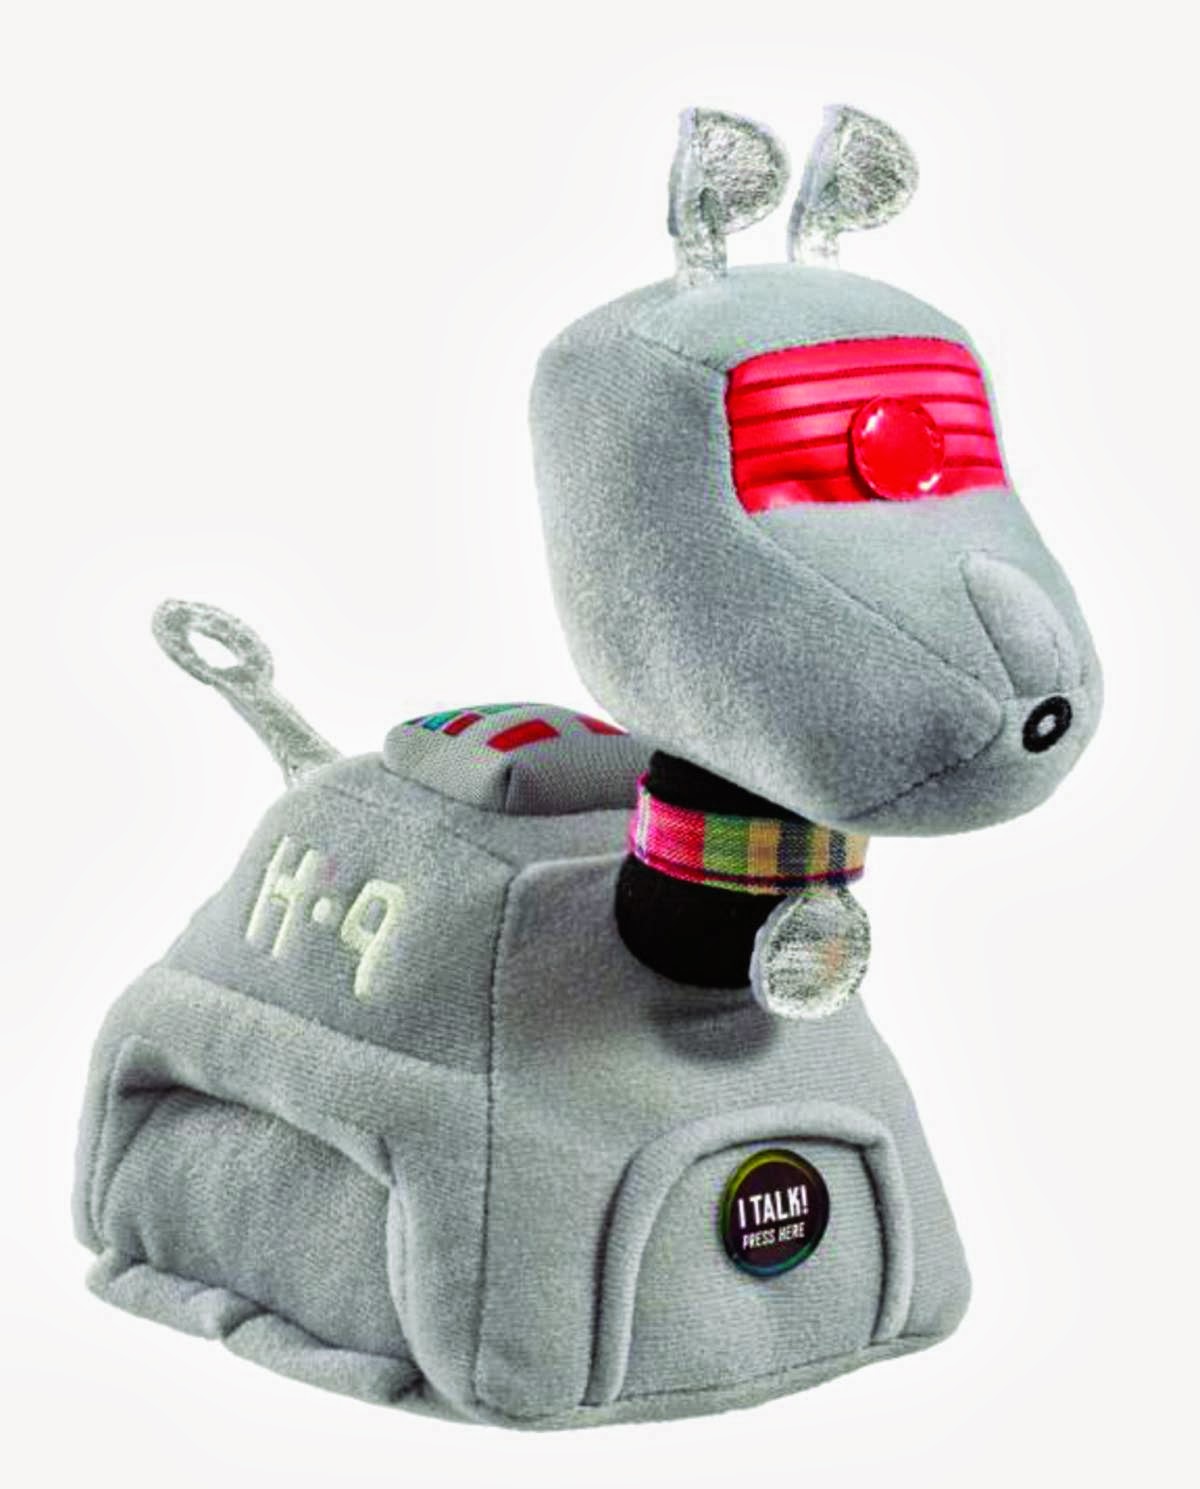 The Previews Exclusive Doctor Who K9 Talking Plush